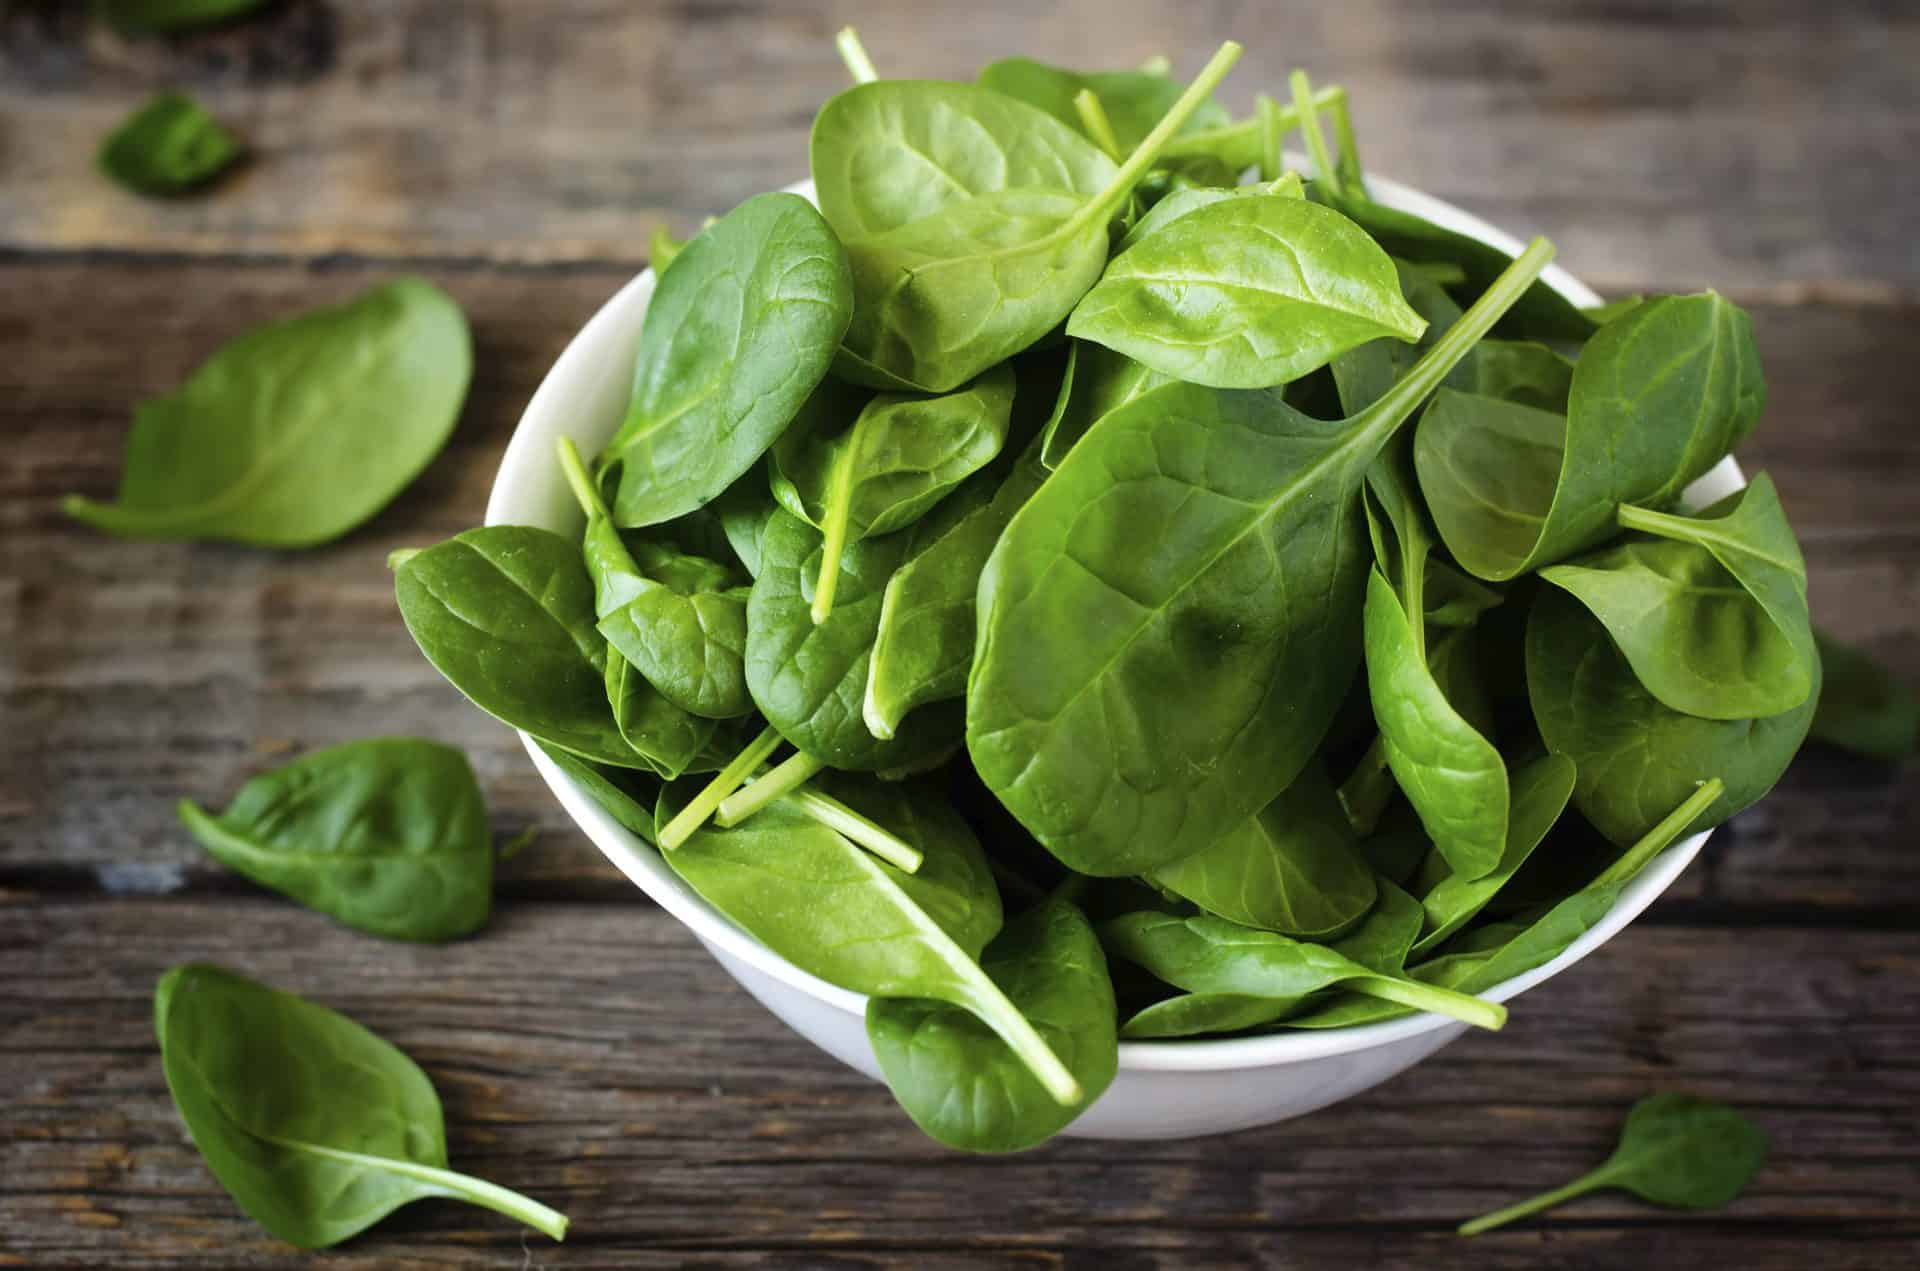 spinach improves your eyesight